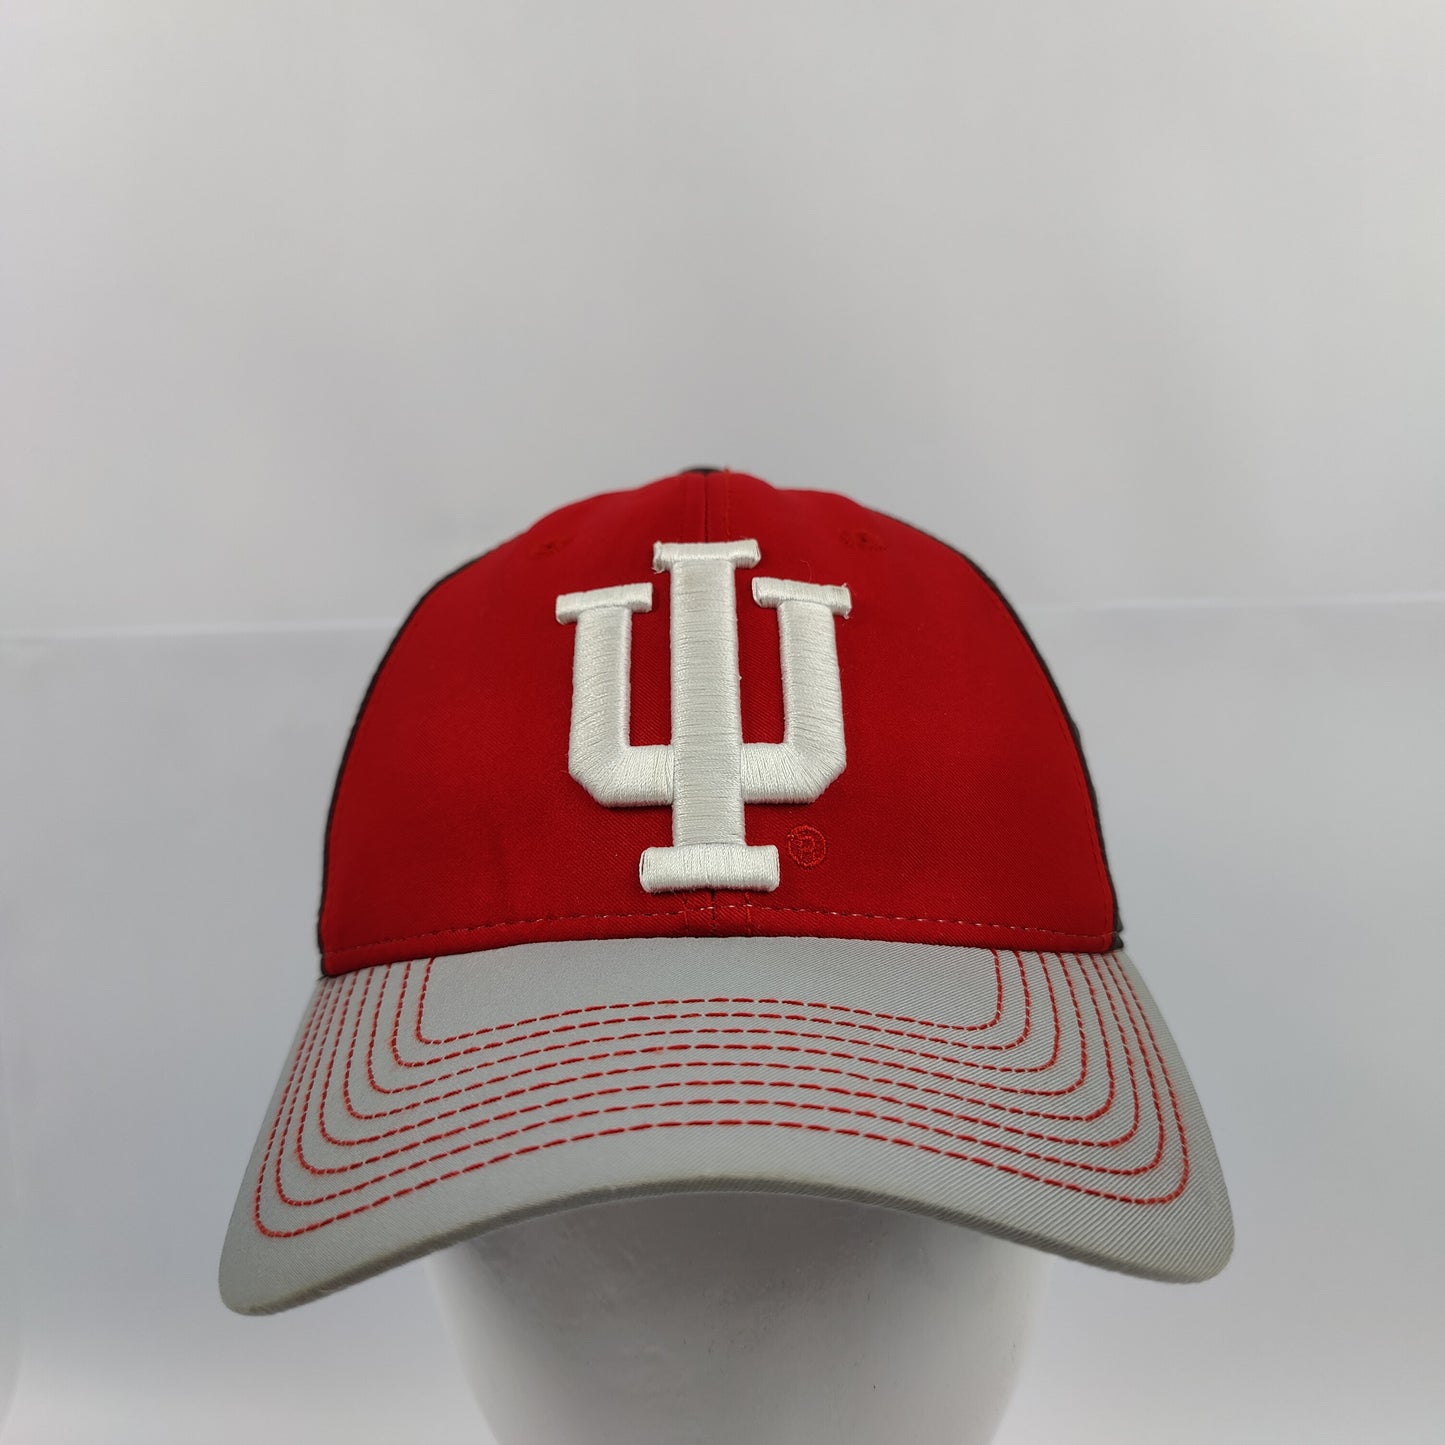 Adidas Indiana Baseball Fitted Cap - Red - 1015